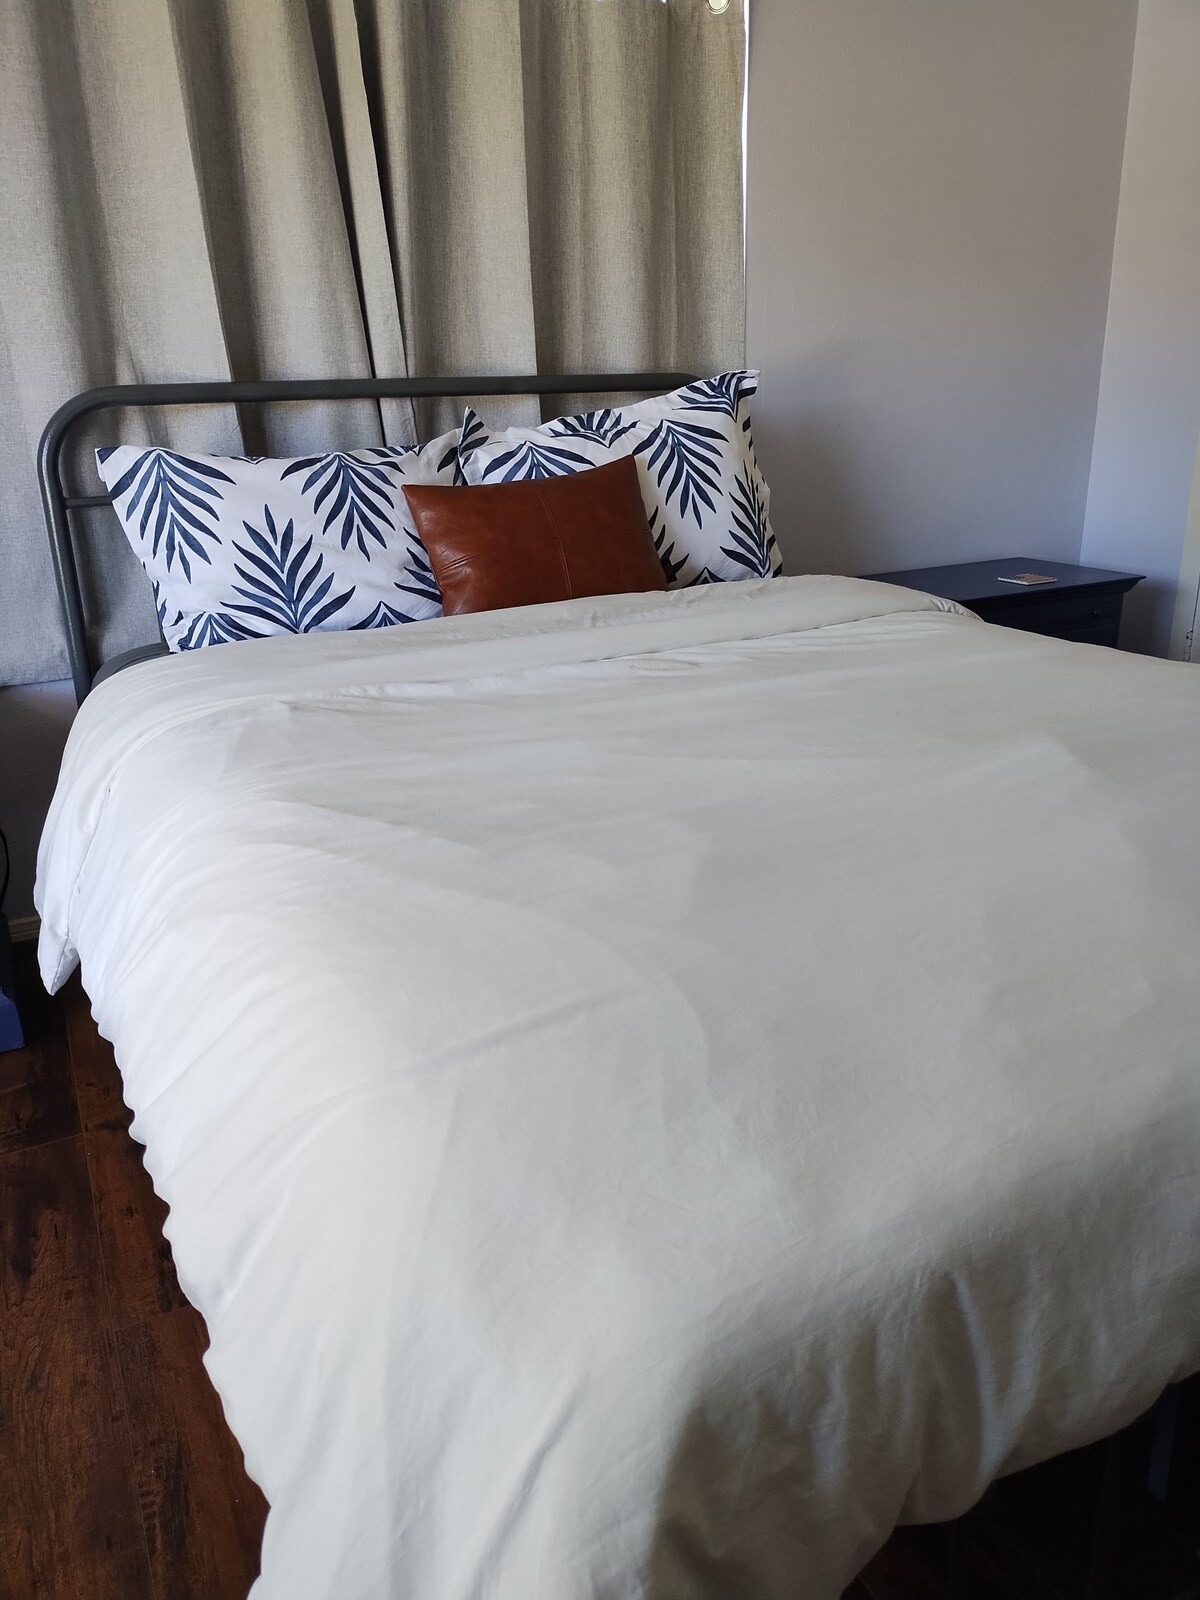 Private 2 room suite - 4 miles from the airport!